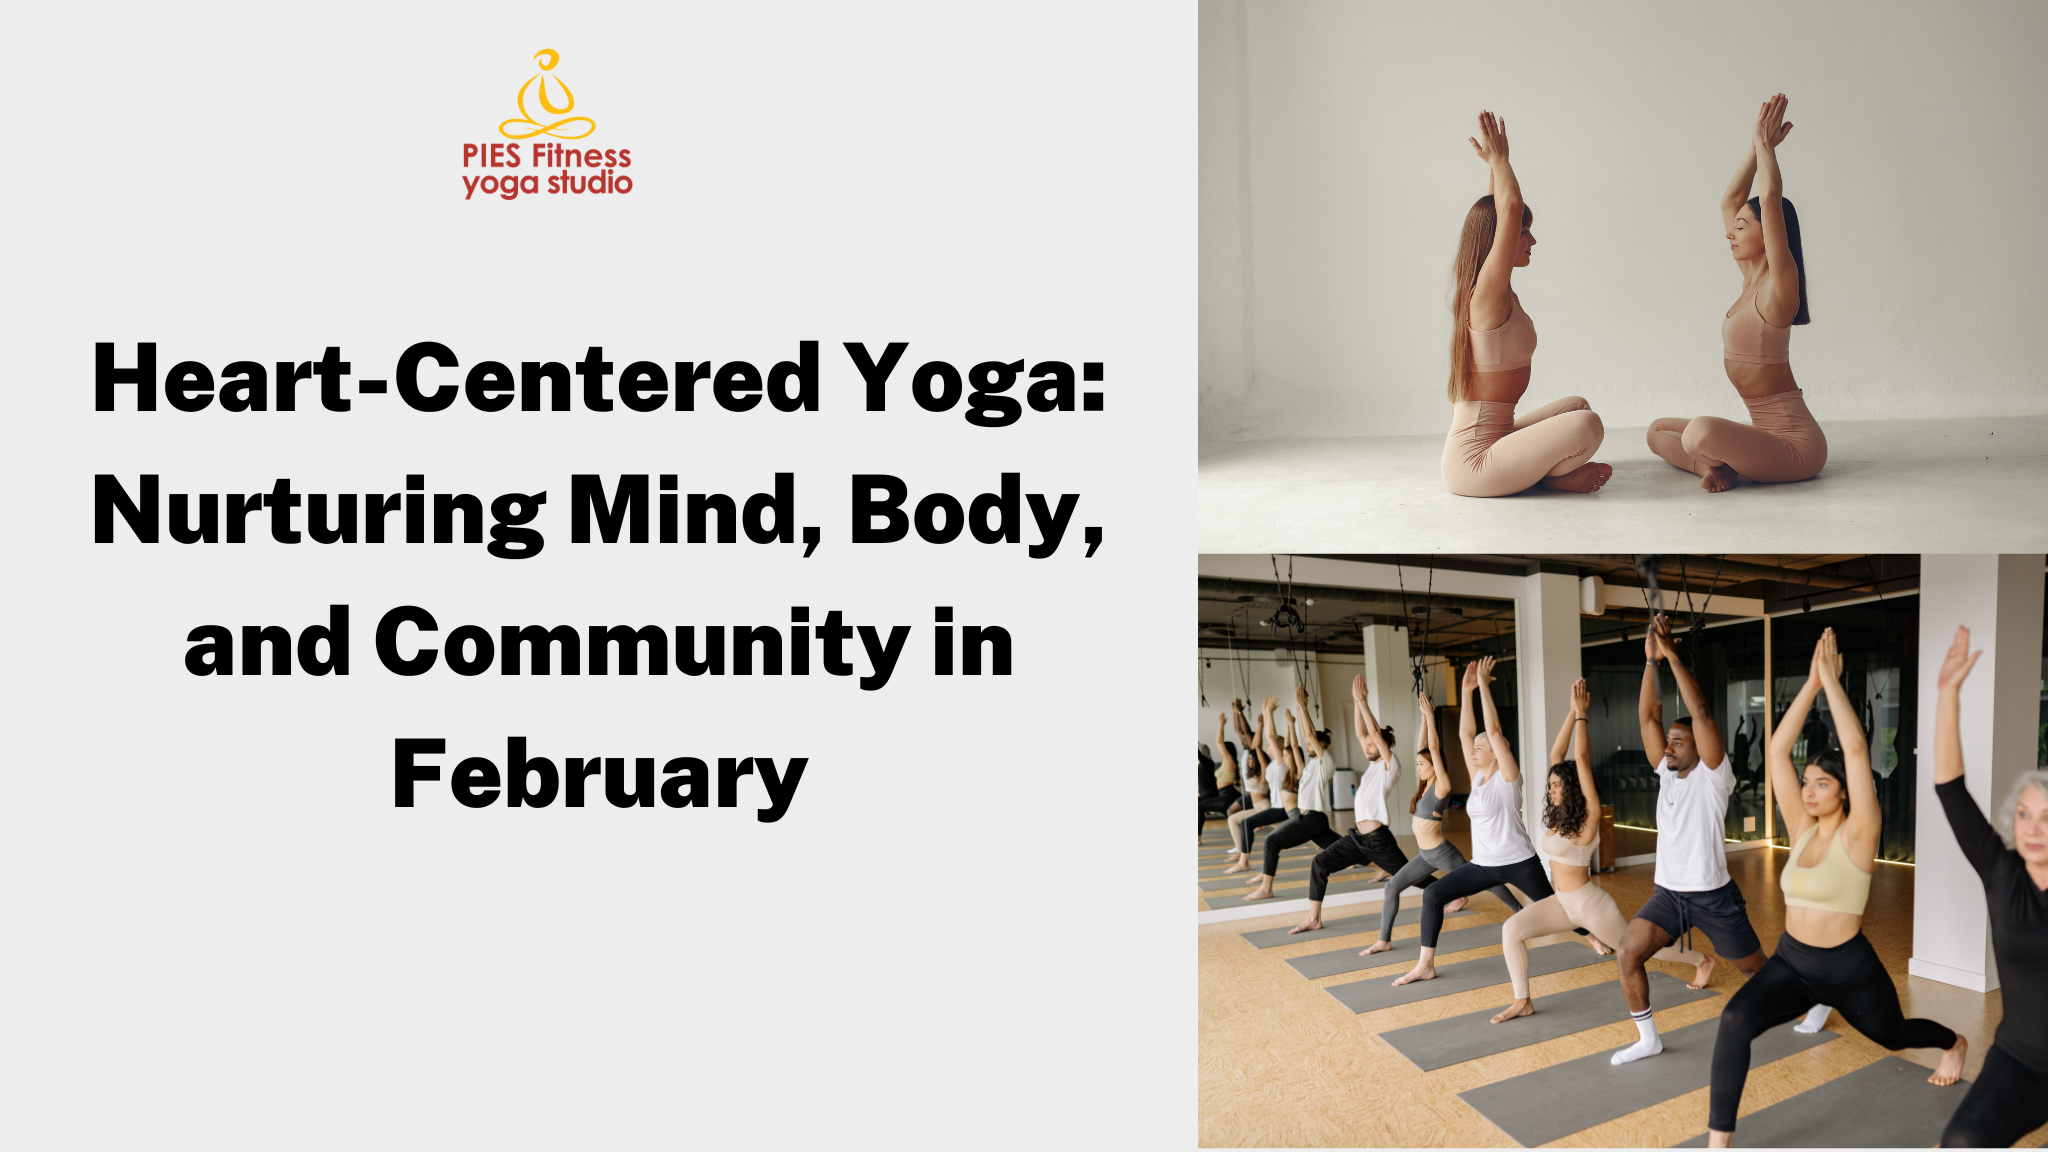 EMBRACE THE HEART’S RADIANCE: HEART-CENTERED YOGA FOR MIND, BODY, AND COMMUNITY IN FEBRUARY